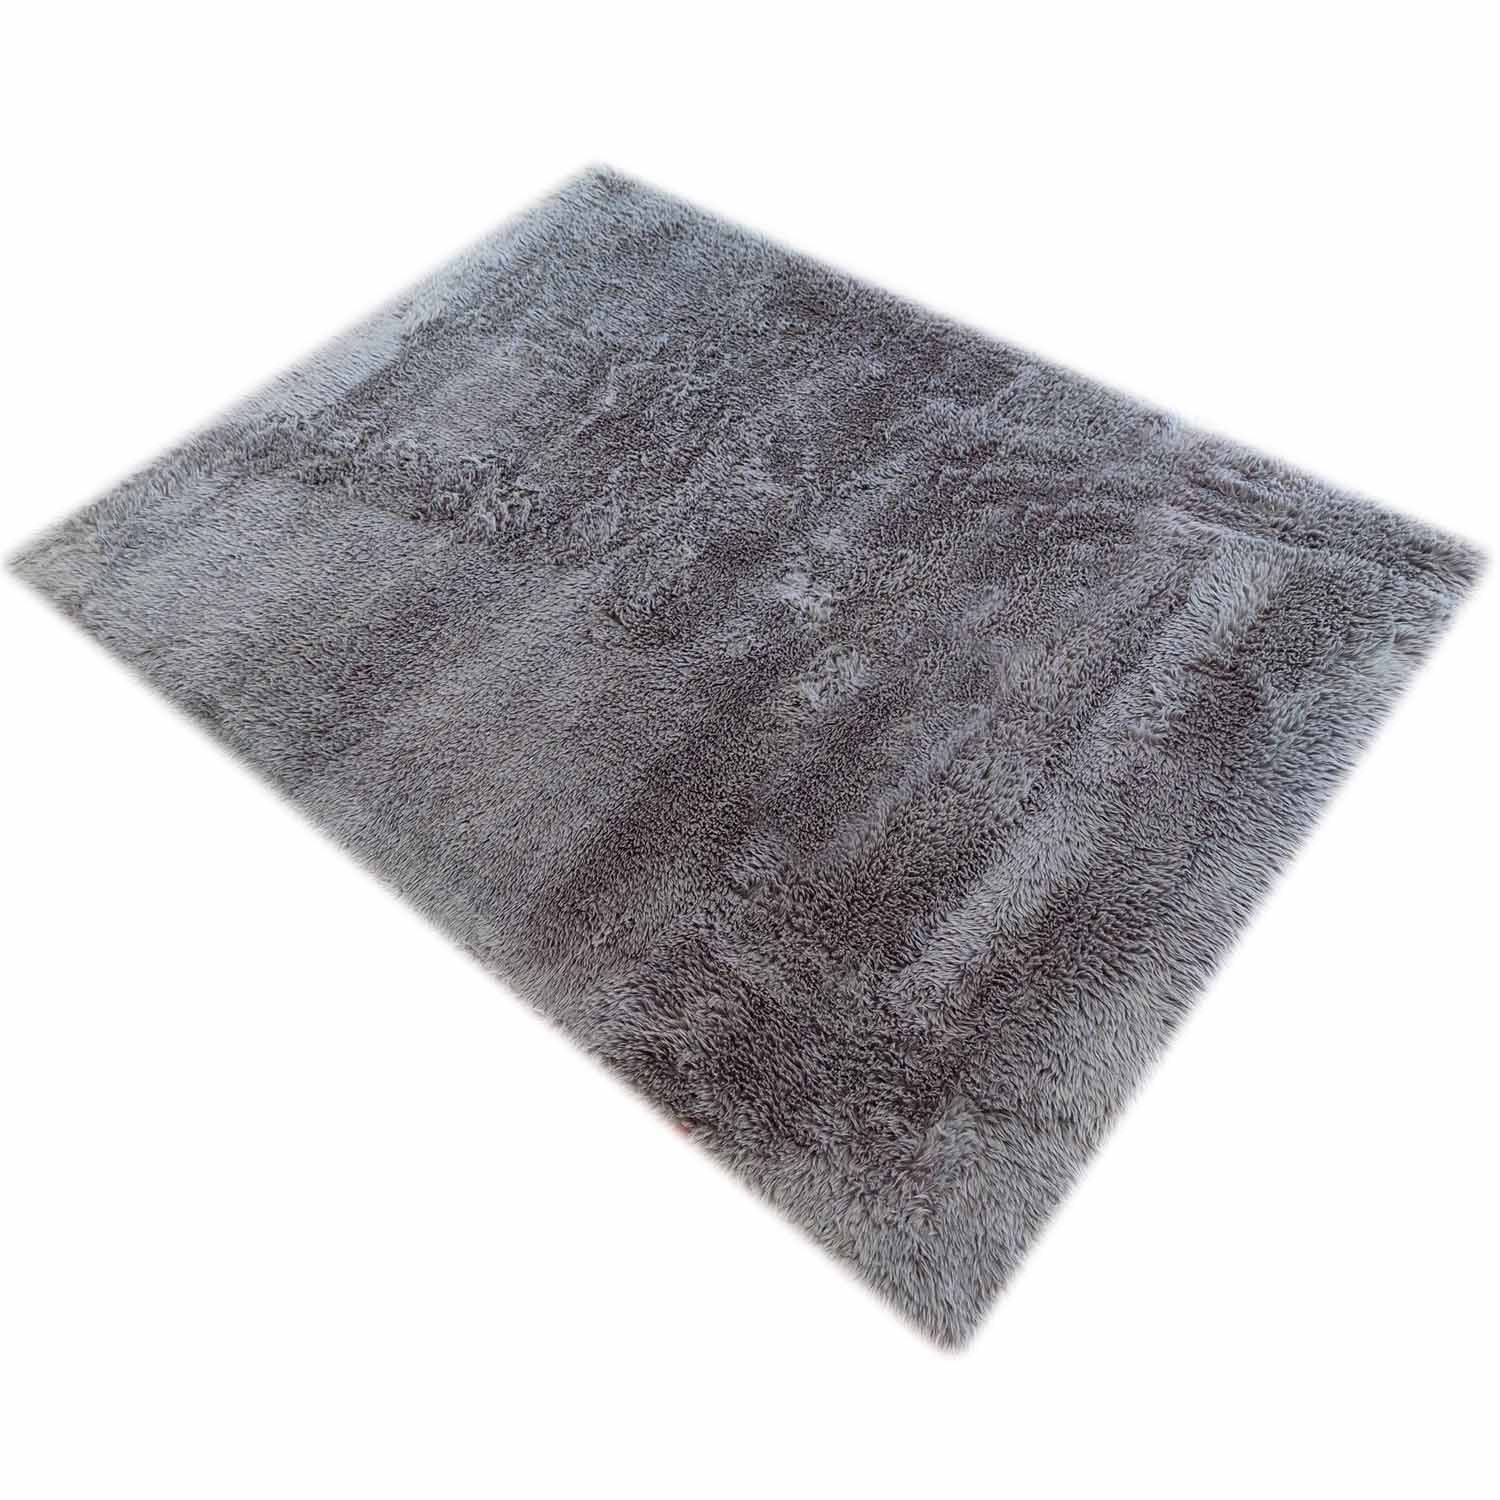 The Home Living Room Sheepskin Rug 120cm x 160cm - Charcoal 1 Shaws Department Stores